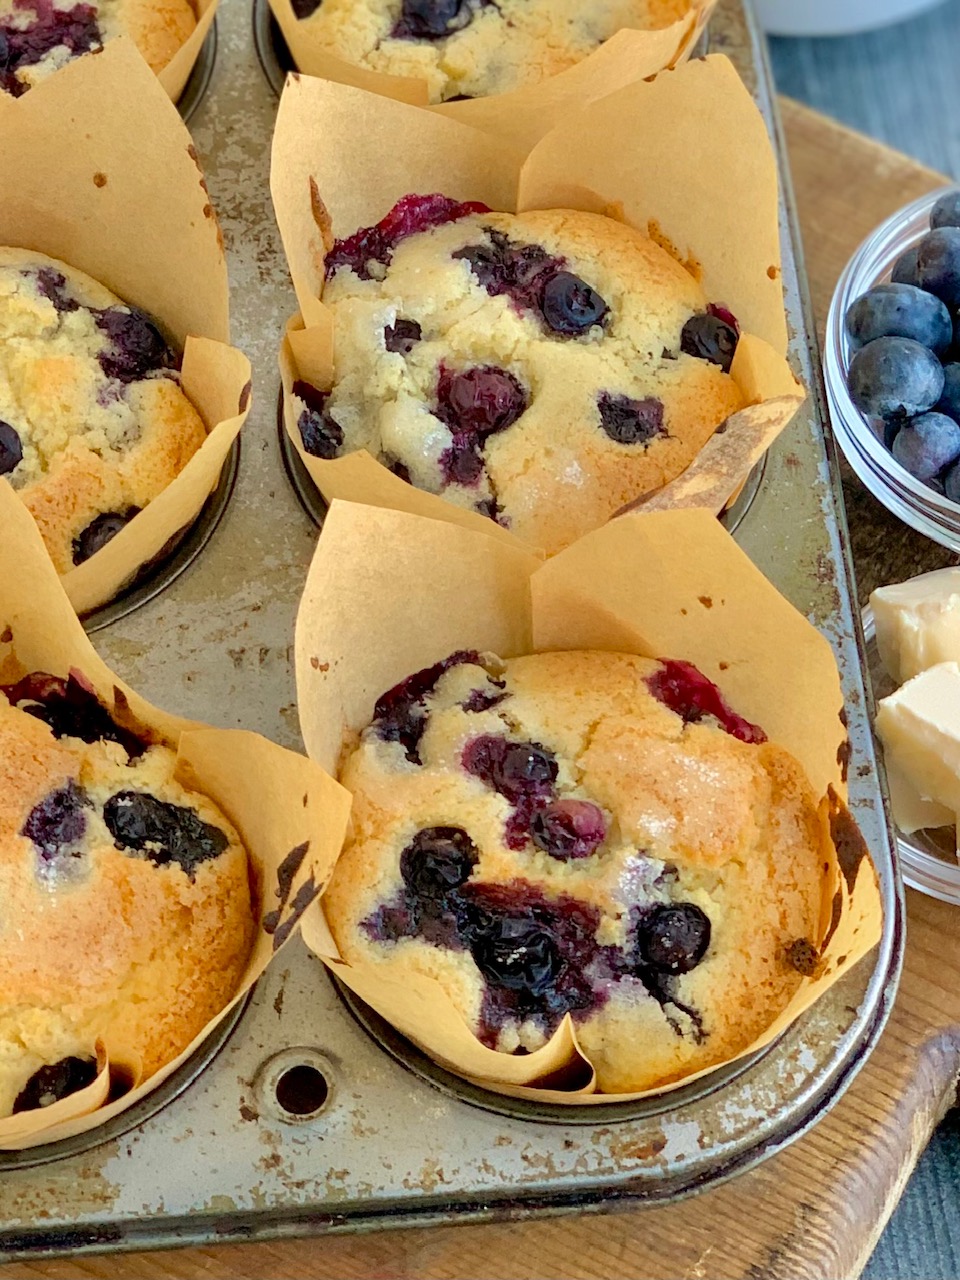 A 6 cavity metal muffin pan filled with light brown tulip cupcake liners. Inside the liners is a soft brown colored muffin with blueberries everywhere next to a bowl of fresh blueberries and butter.